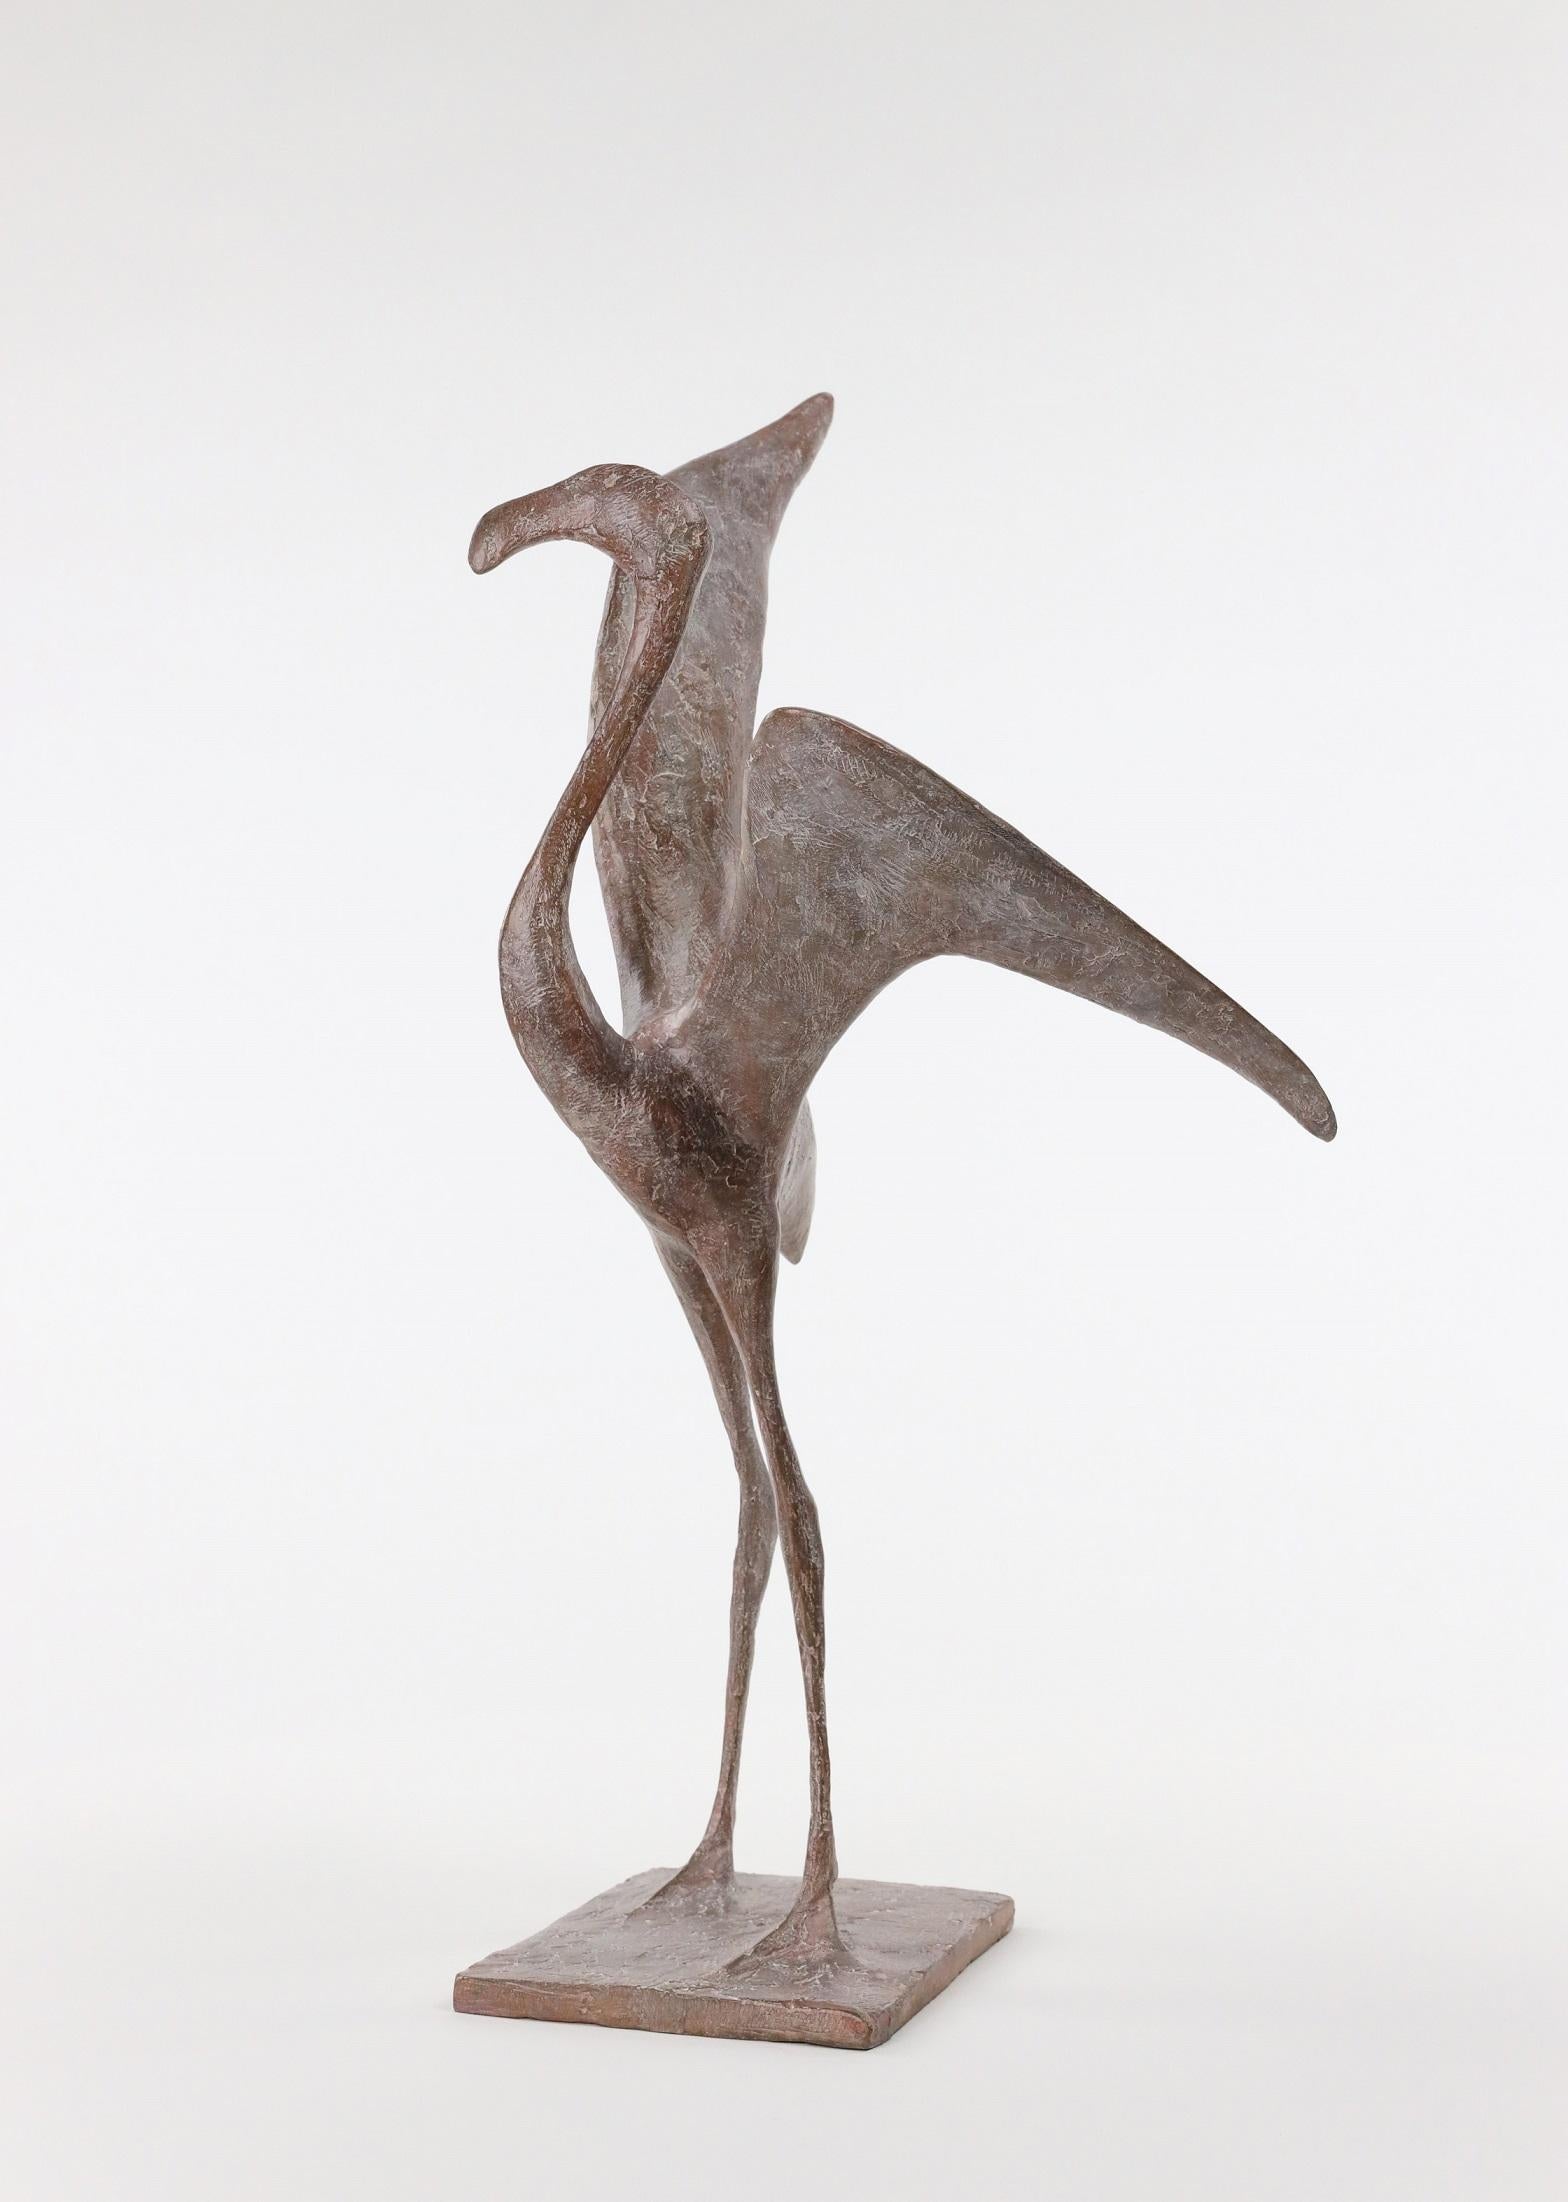 Flight VII is a bronze sculpture by French contemporary artist Pierre Yermia, dimensions are 60 × 45 × 45 cm (23.6 × 17.7 × 17.7 in). The sculpture is signed and numbered, it is part of a limited edition of 8 editions + 4 artist’s proofs, and comes